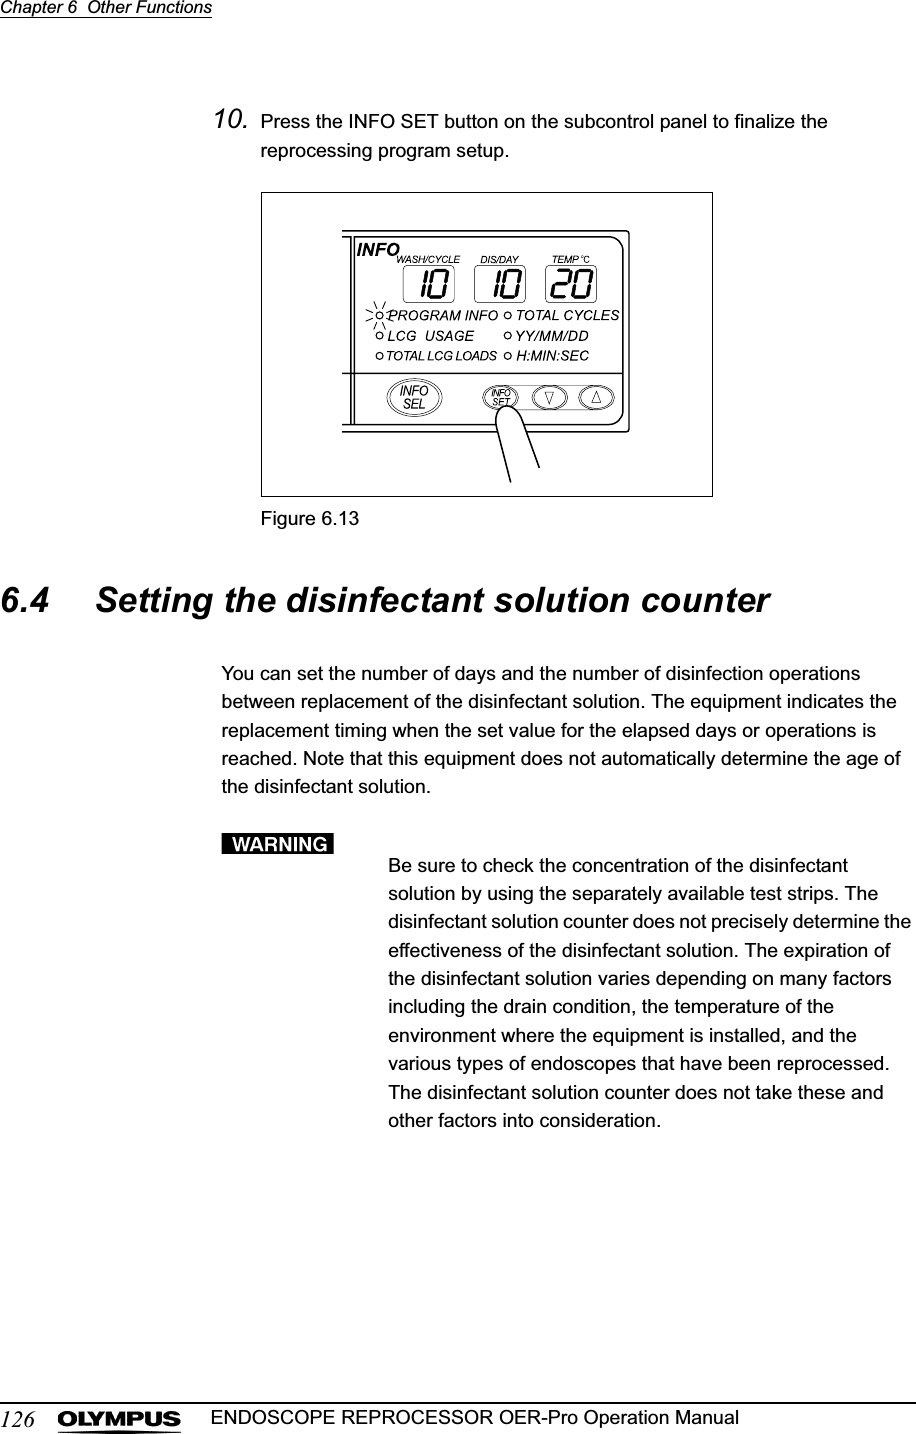 126Chapter 6  Other FunctionsENDOSCOPE REPROCESSOR OER-Pro Operation Manual10. Press the INFO SET button on the subcontrol panel to finalize the reprocessing program setup.Figure 6.136.4 Setting the disinfectant solution counterYou can set the number of days and the number of disinfection operations between replacement of the disinfectant solution. The equipment indicates the replacement timing when the set value for the elapsed days or operations is reached. Note that this equipment does not automatically determine the age of the disinfectant solution.Be sure to check the concentration of the disinfectant solution by using the separately available test strips. The disinfectant solution counter does not precisely determine the effectiveness of the disinfectant solution. The expiration of the disinfectant solution varies depending on many factors including the drain condition, the temperature of the environment where the equipment is installed, and the various types of endoscopes that have been reprocessed. The disinfectant solution counter does not take these and other factors into consideration.